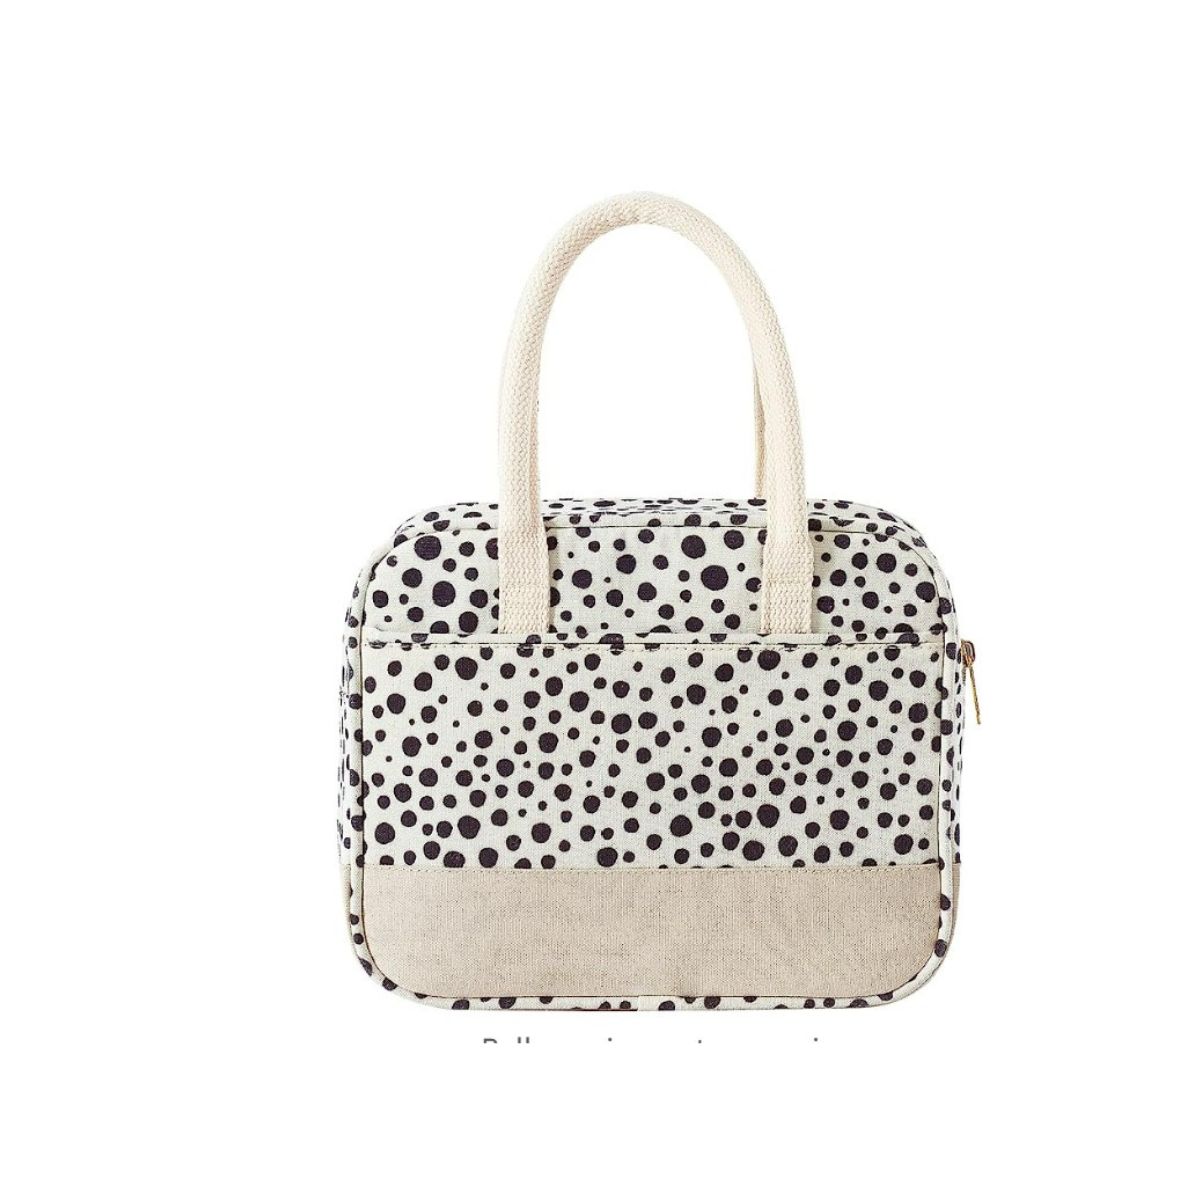 Brown and cream polka dot insulated lunch box